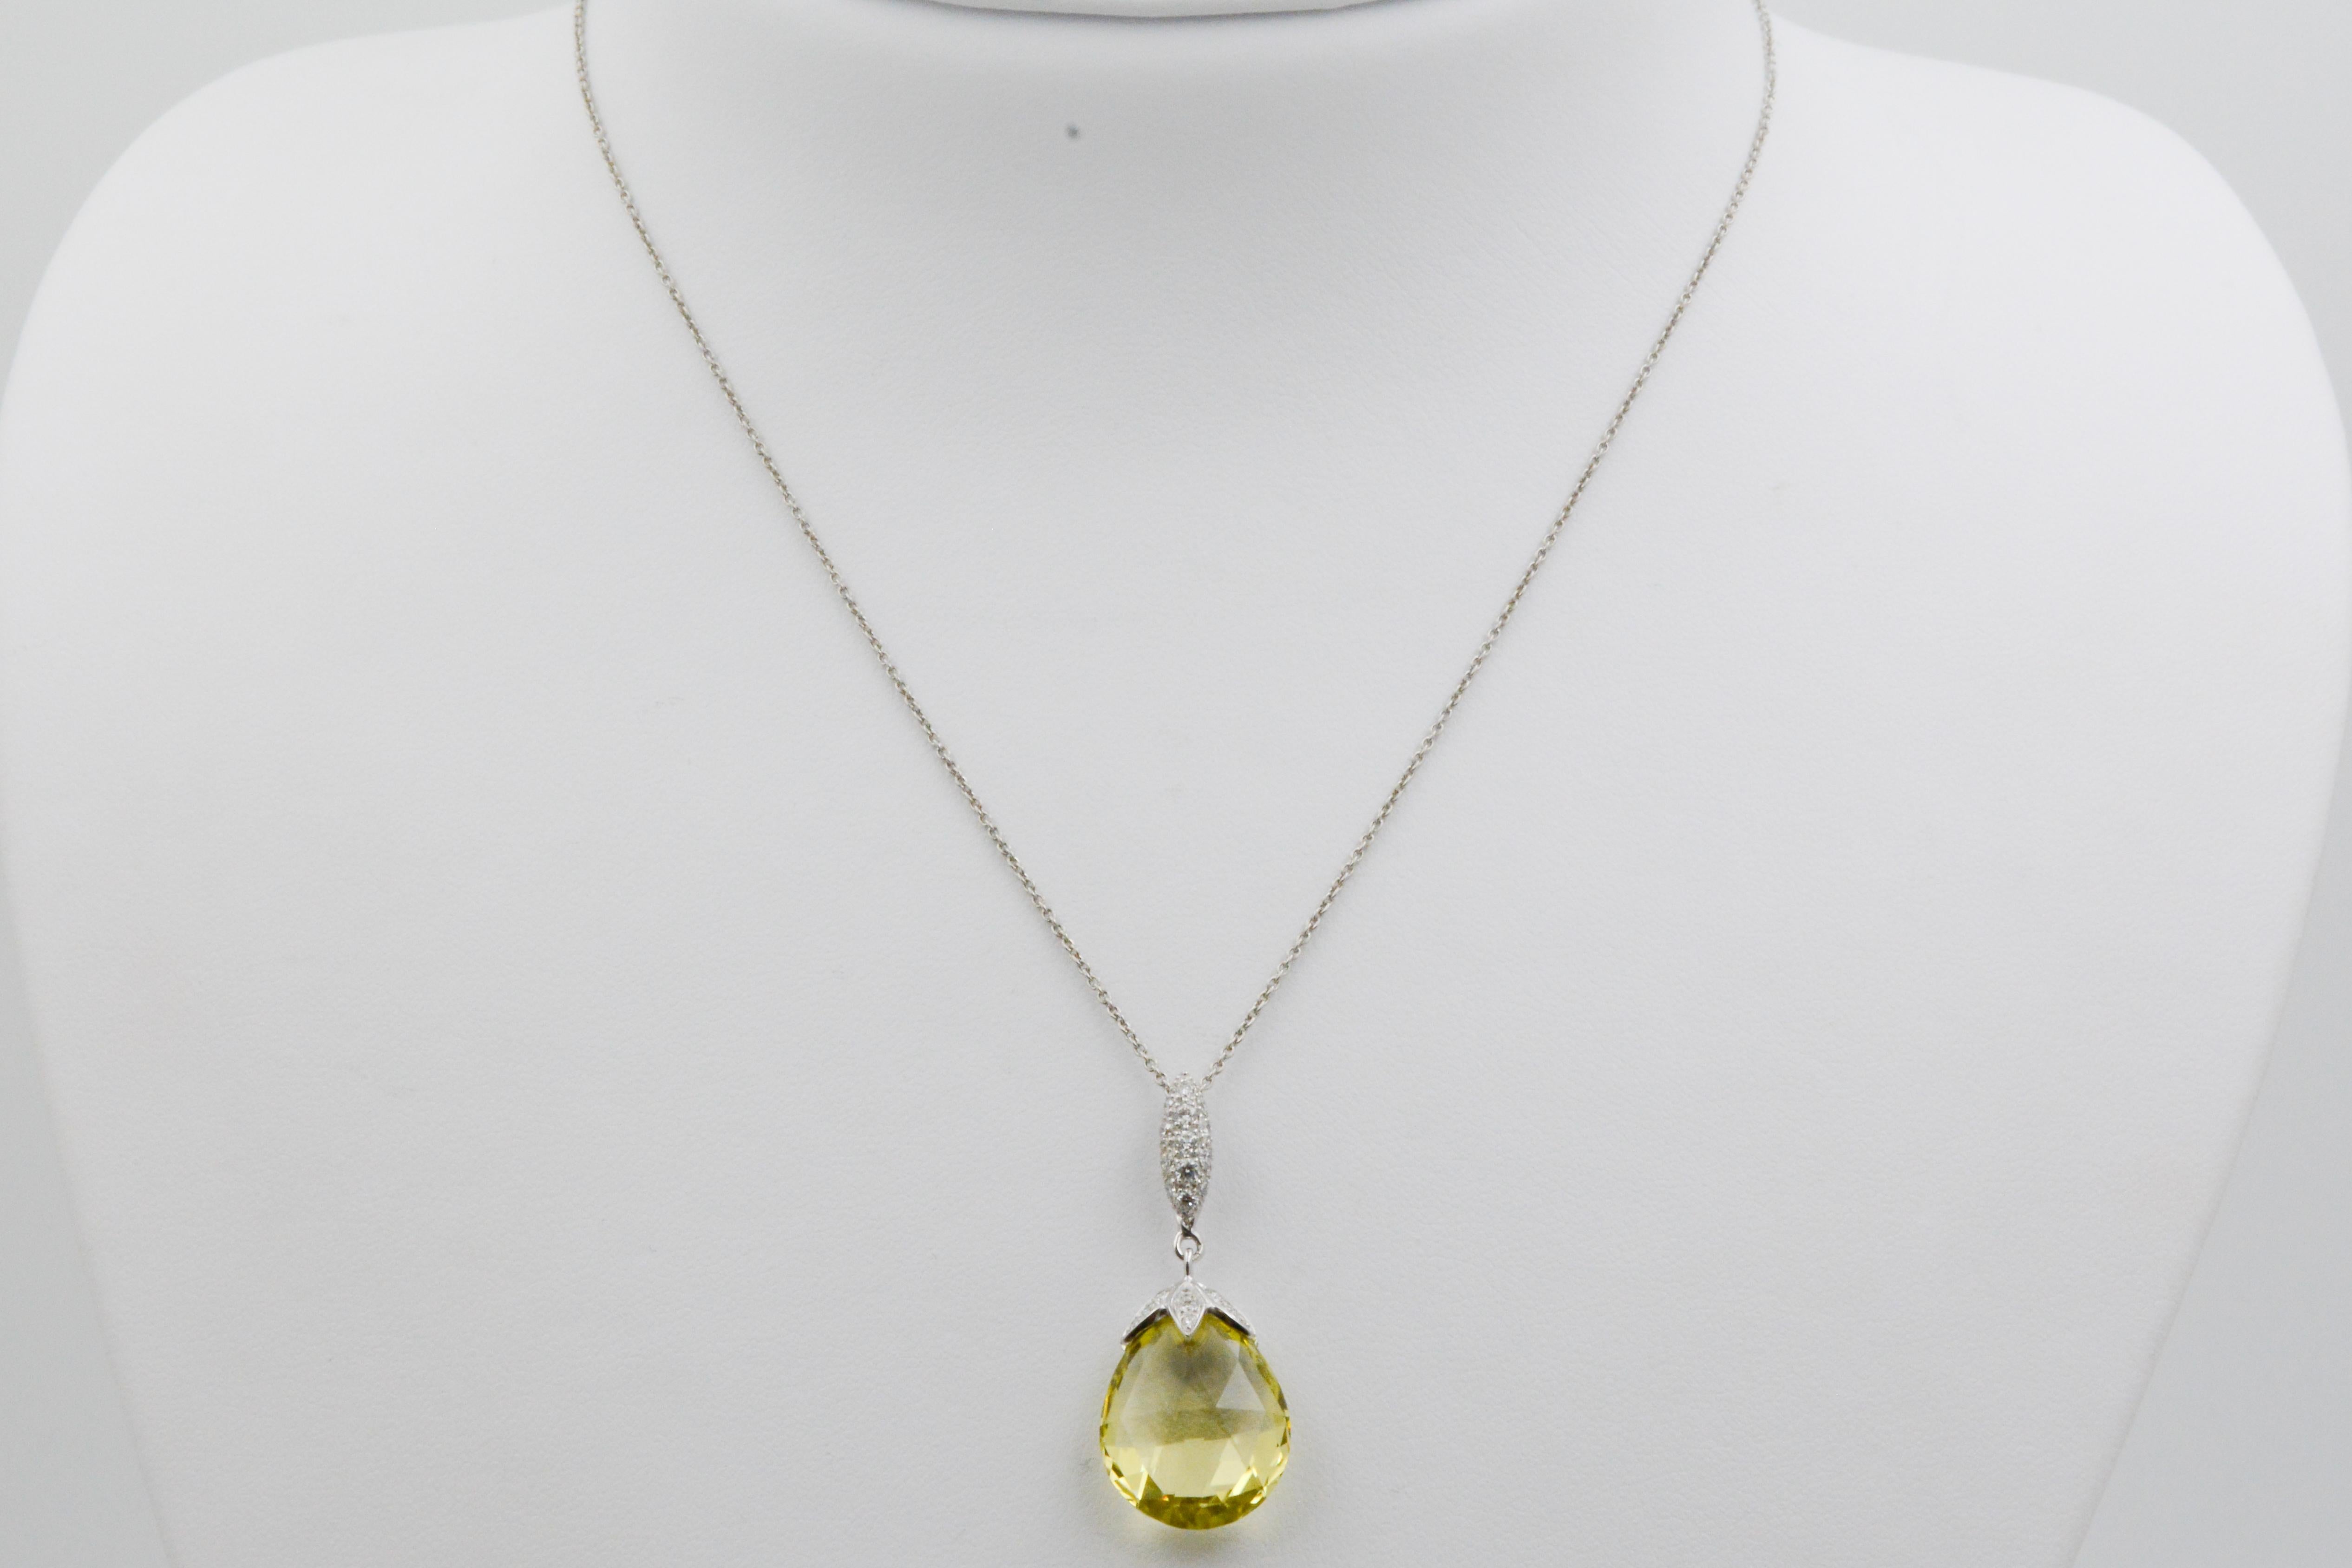 This pendant features a 10.50 carat total weight Lemon Quartz Briolette dangling from an 18 karat white gold marquise shape bail and petal shaped cap set with 0.22 carat total weight pave set round brilliant cut diamonds. Pulling this spectacular